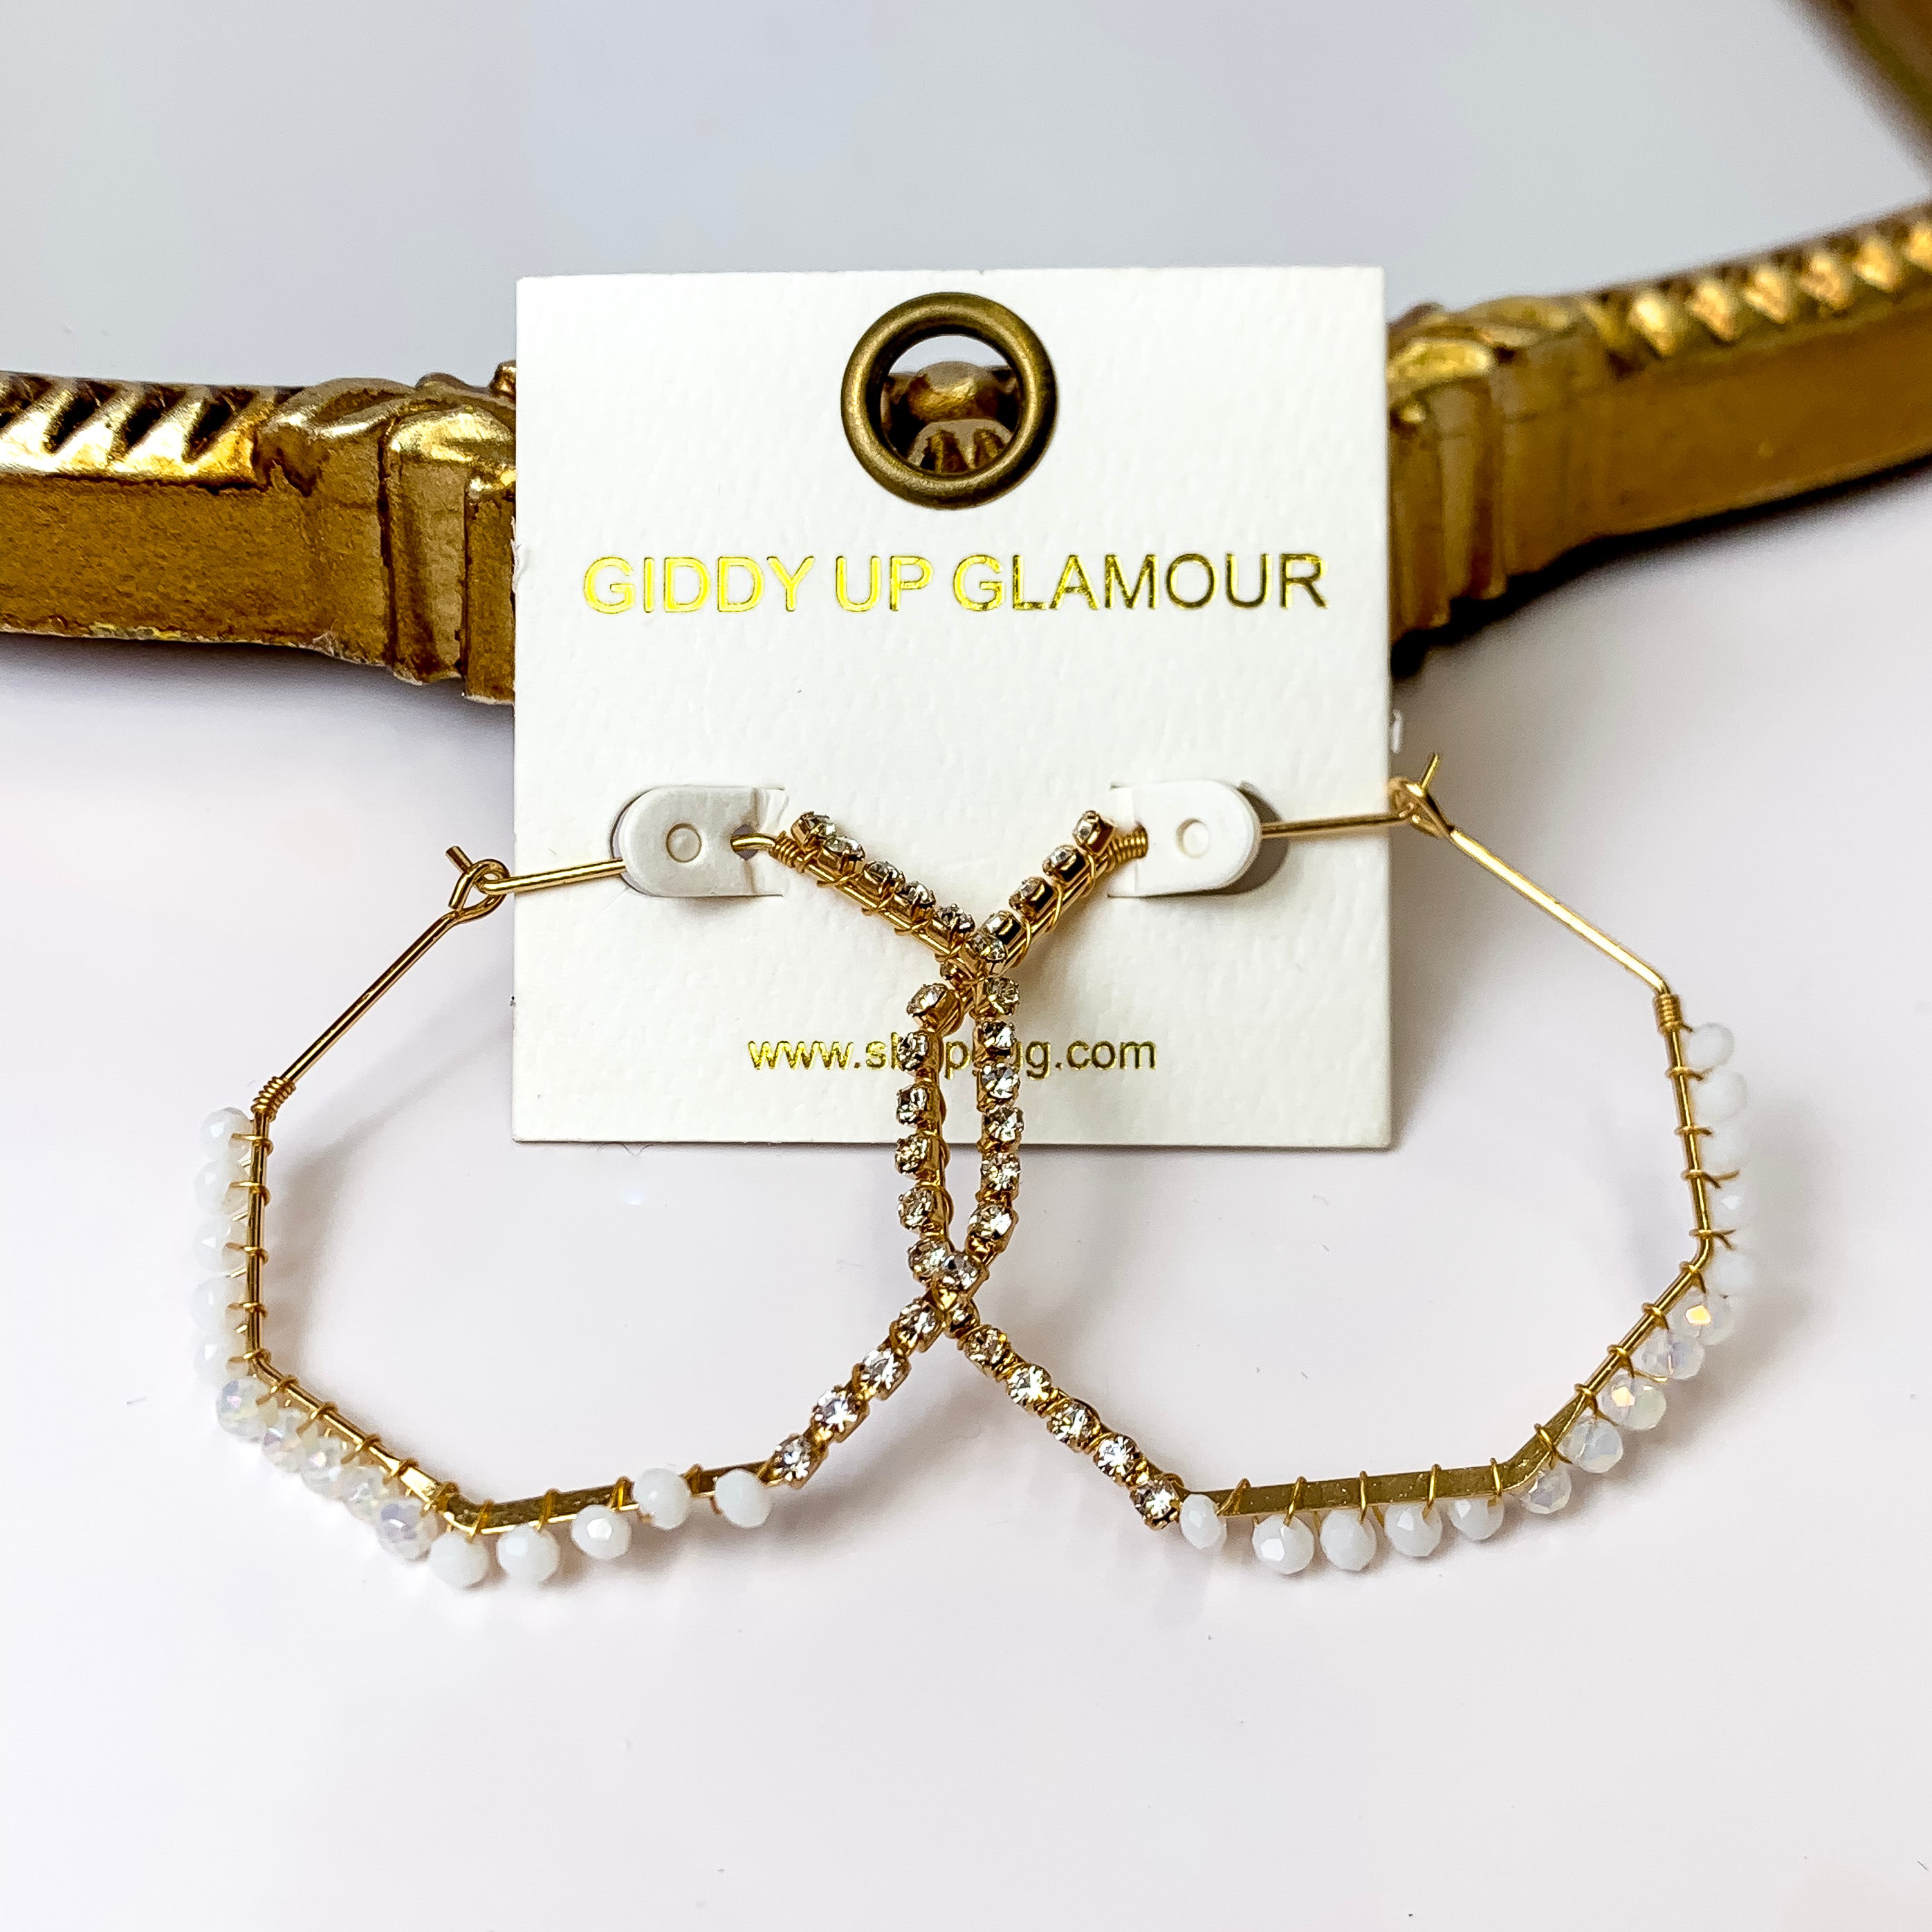 Gold Tone Crystal Beaded Octagonal Hoop Earrings - Giddy Up Glamour Boutique